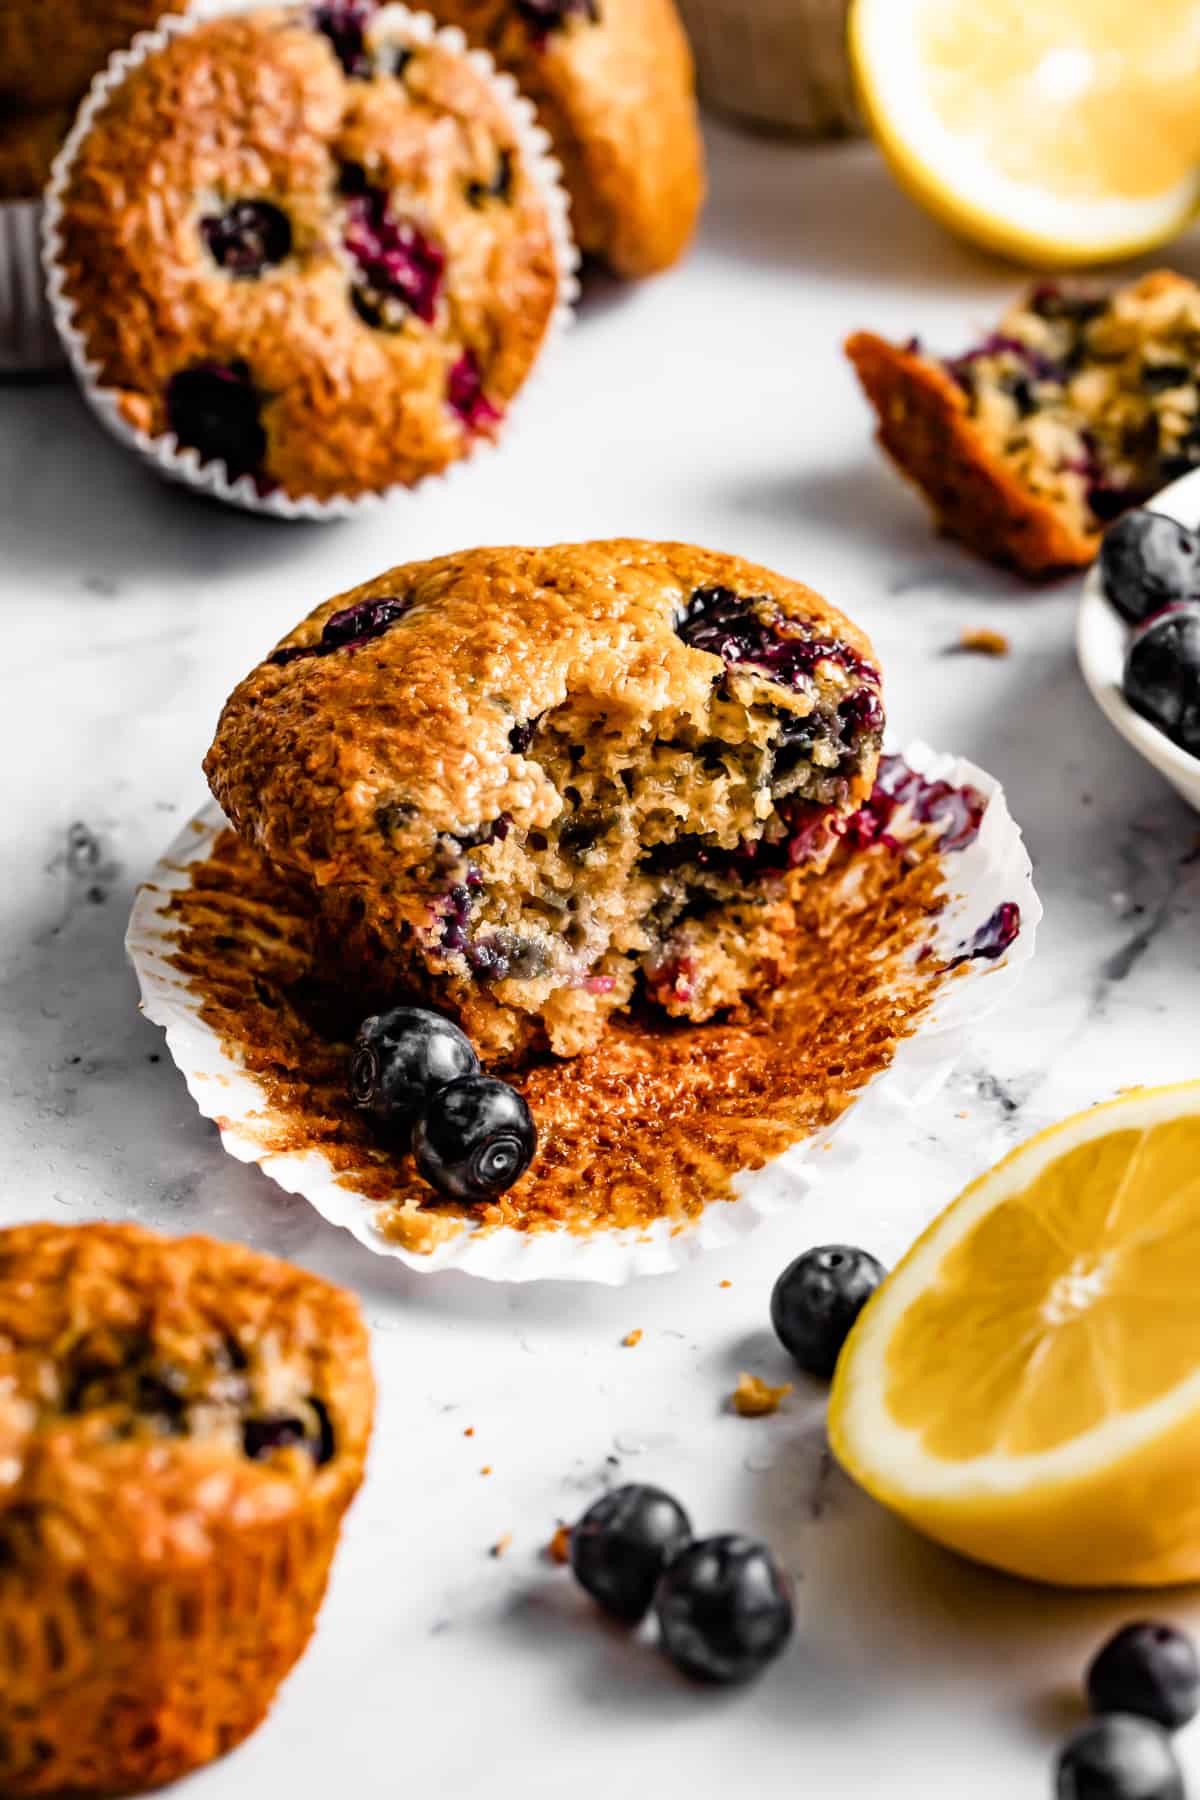 Blueberry lemon muffins surrounded by fresh blueberries. One muffin has a bite taken out of it.